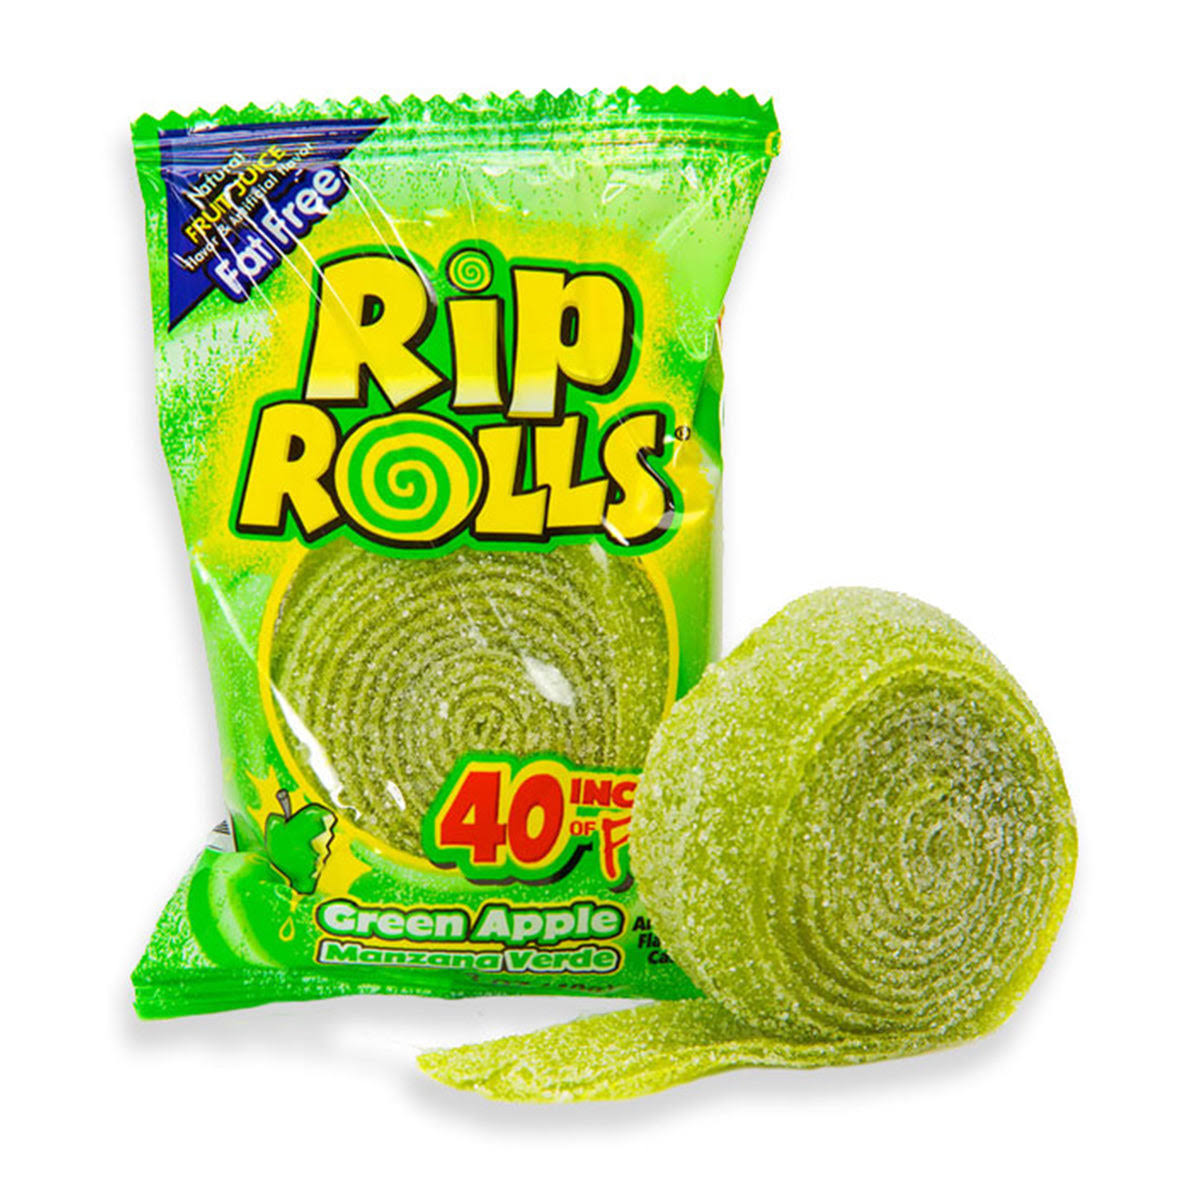 Rip Rolls Candy - Sour Apple, 40g